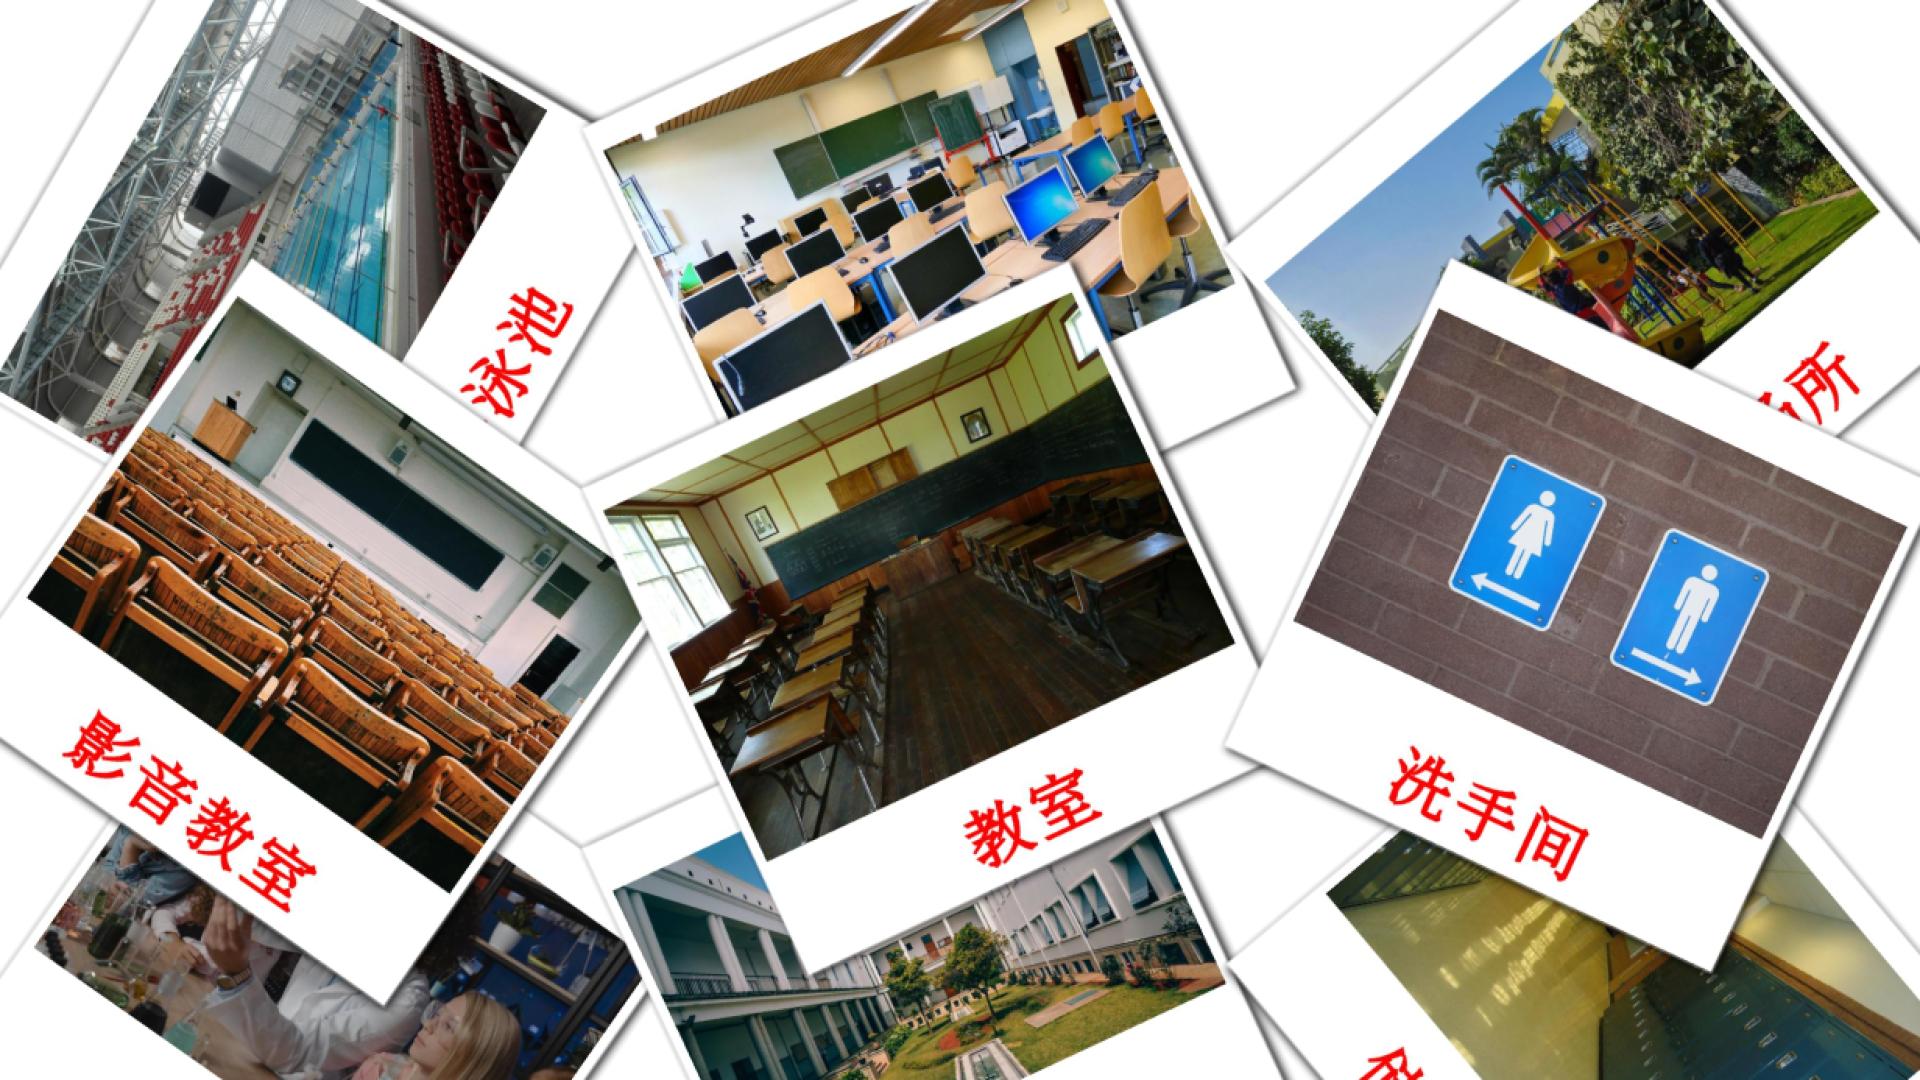 School building - chinese(Traditional) vocabulary cards